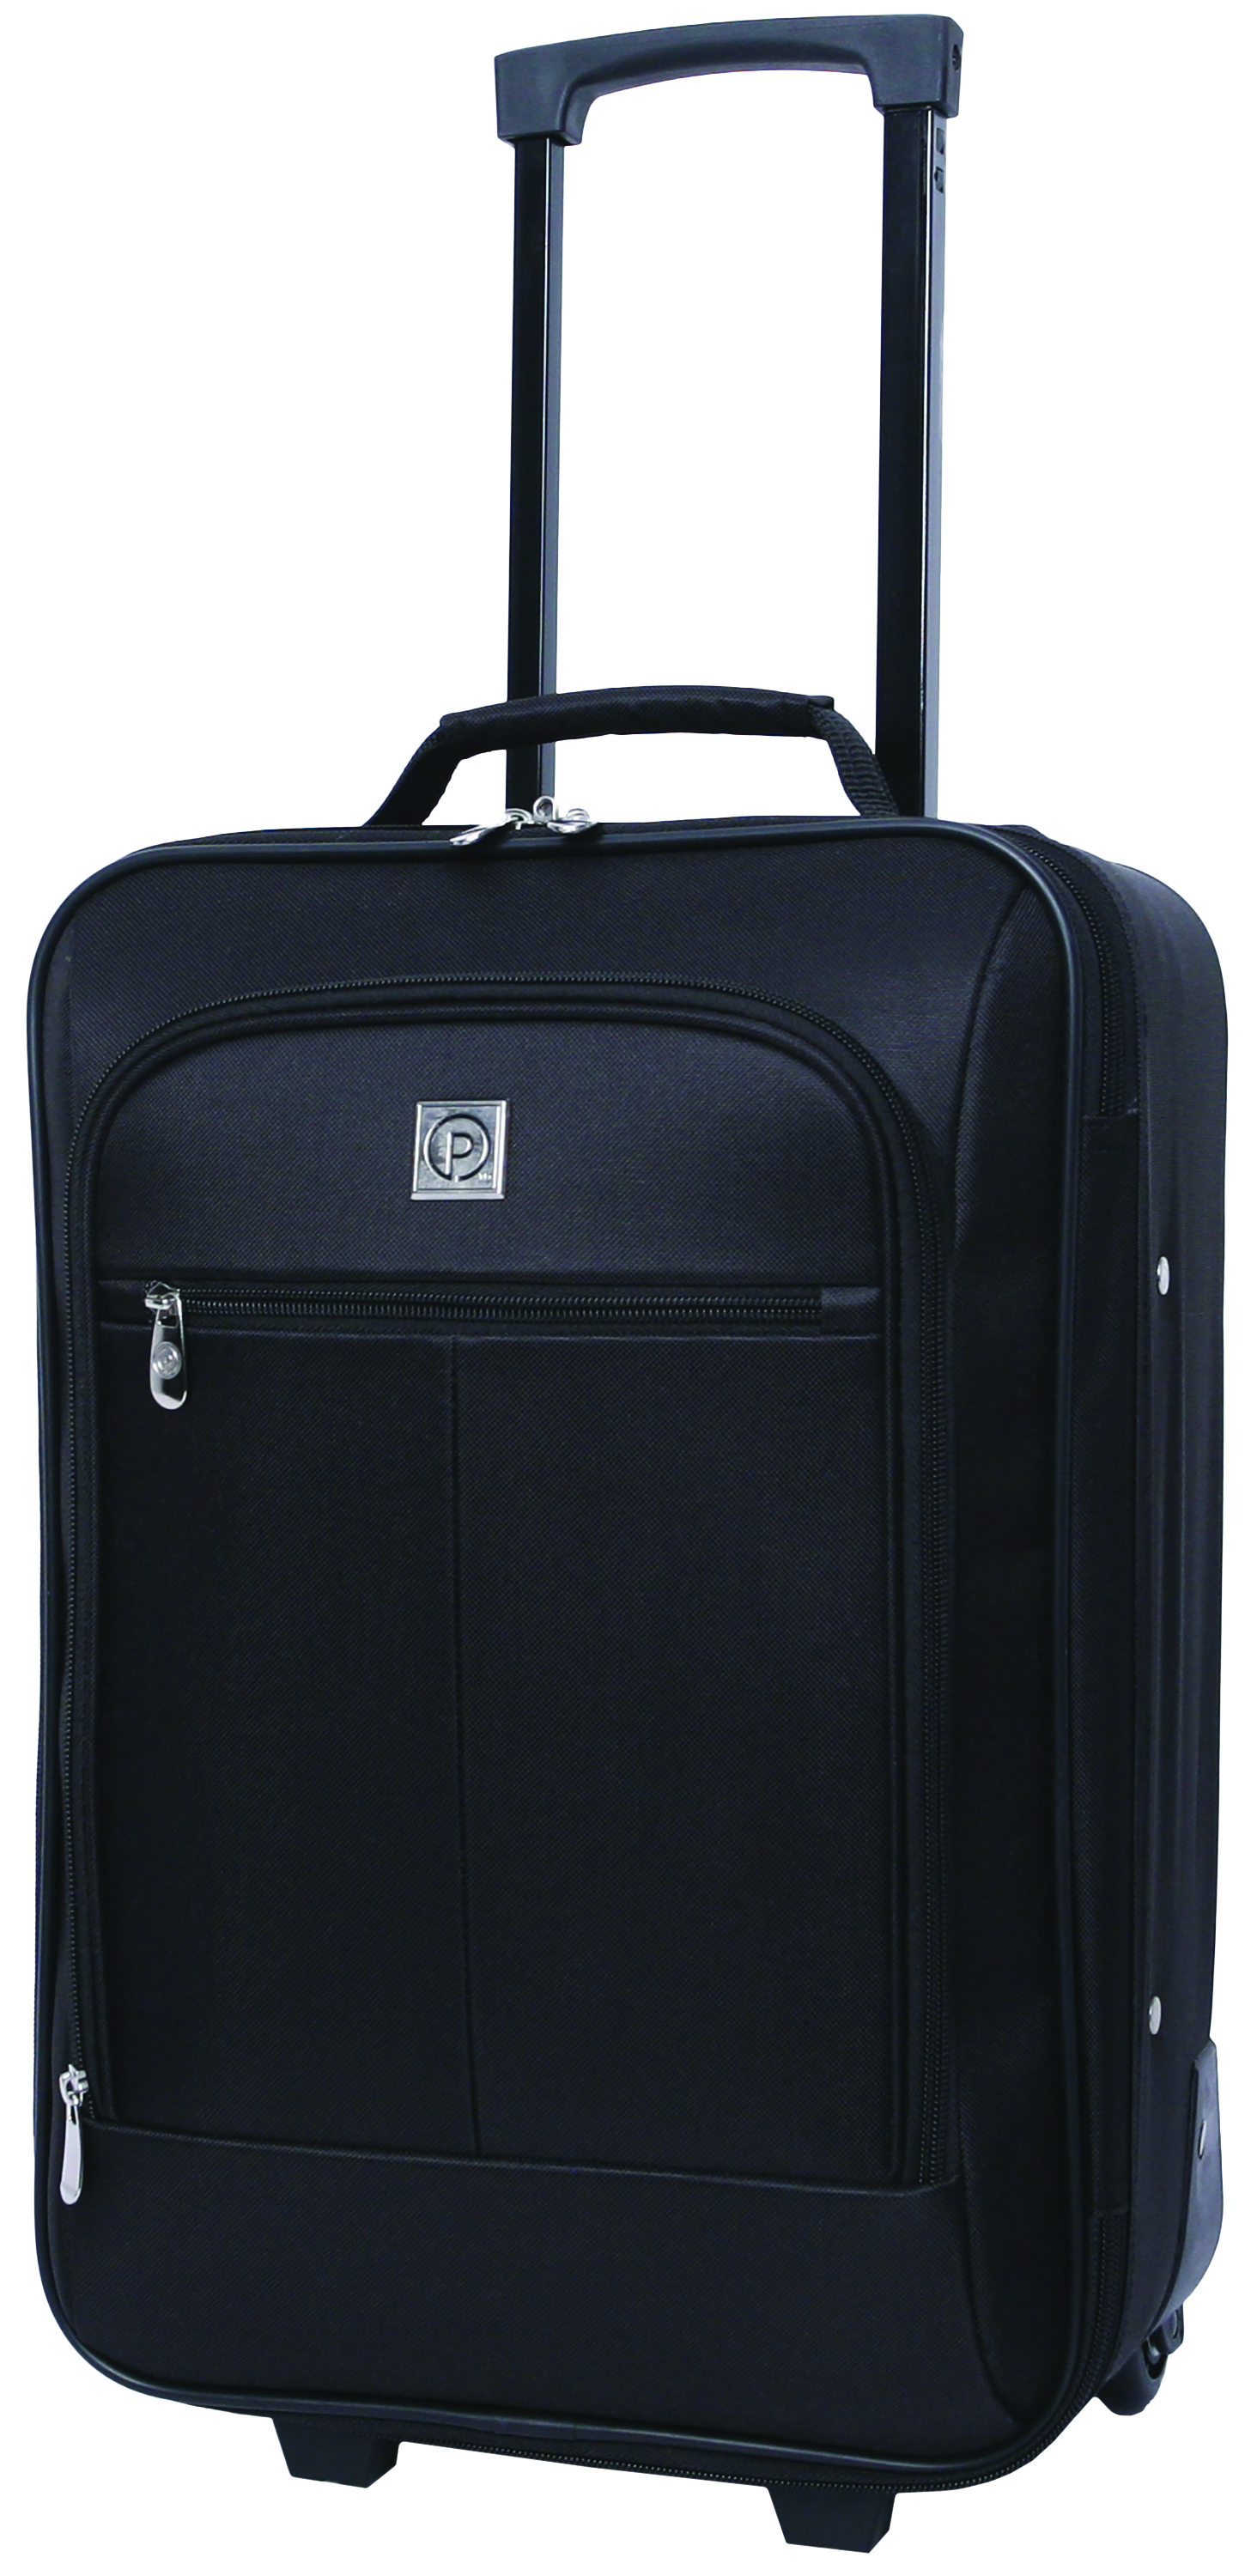 Carry On Luggage Rolling Luggage Cabin Size 18 Travel Bag with ...